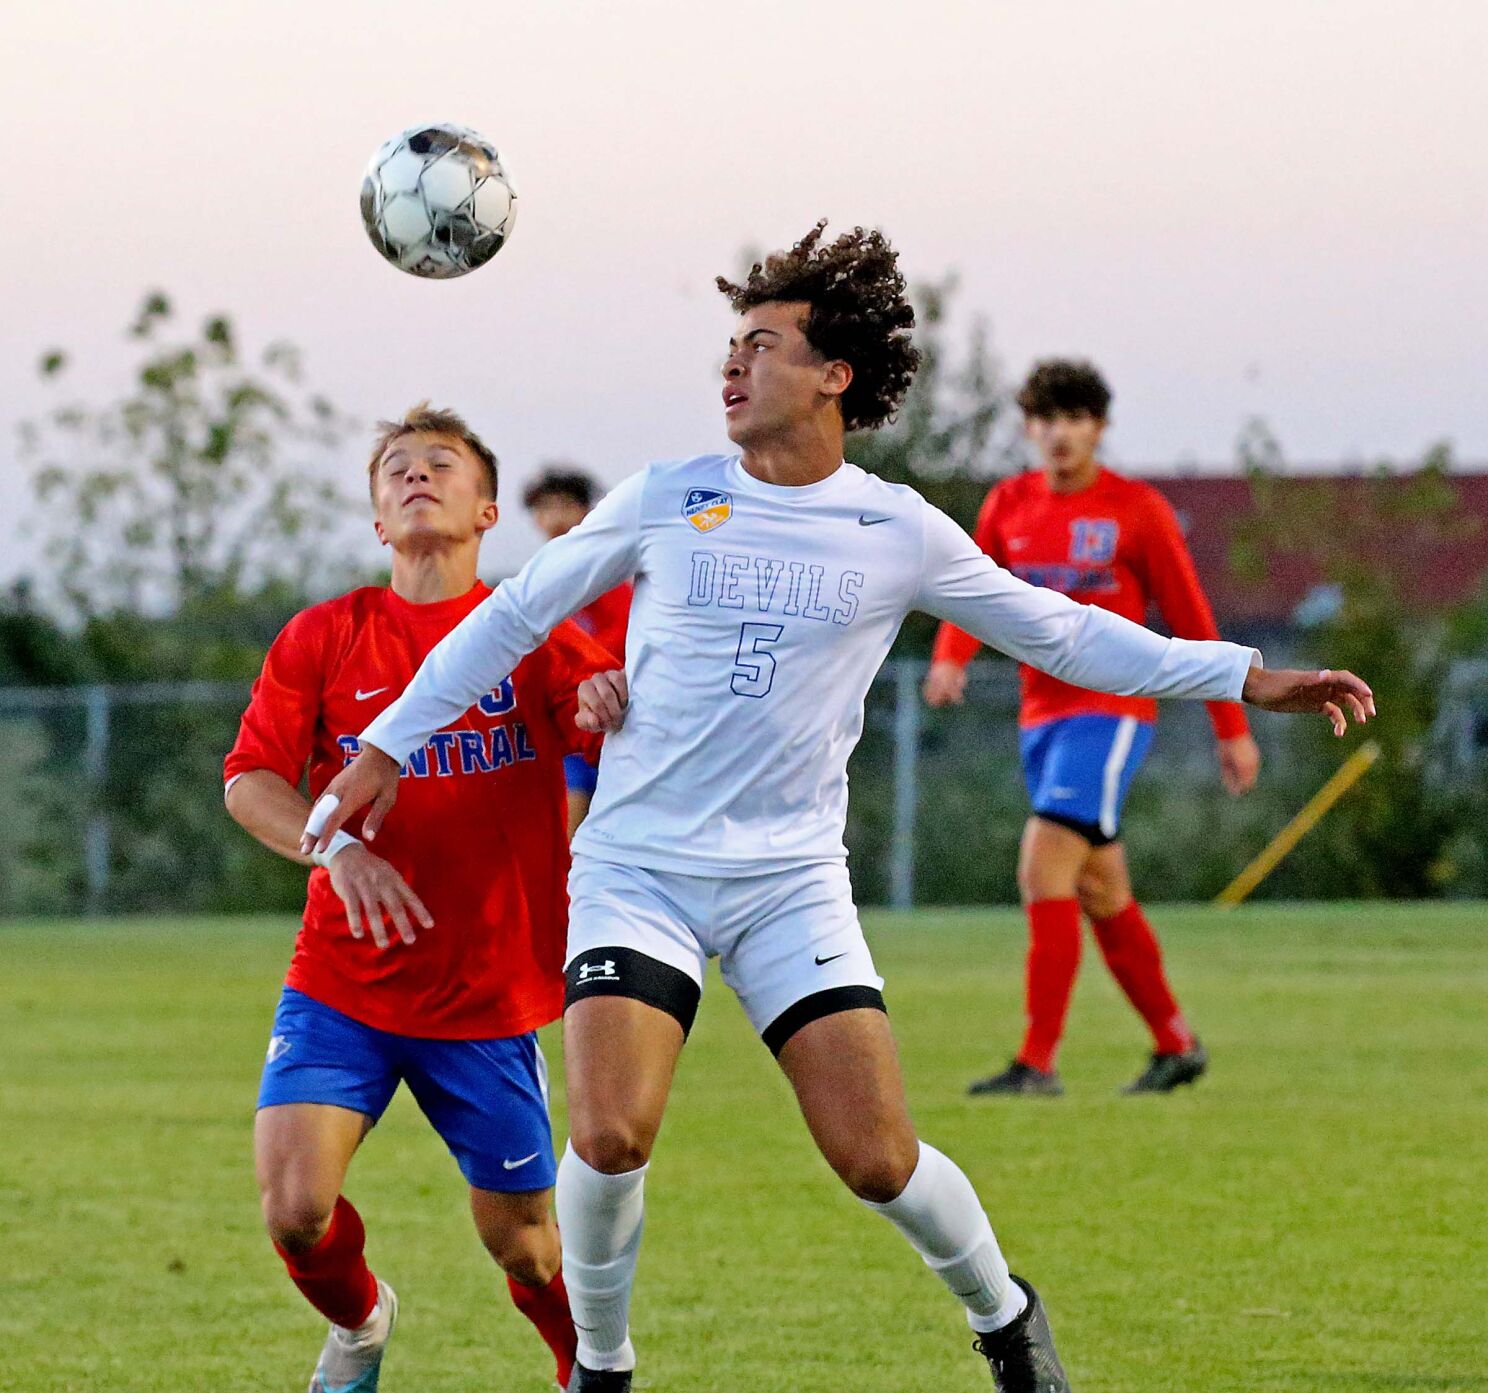 11TH REGION BOYS SOCCER: Indians, Patriots fall in first round